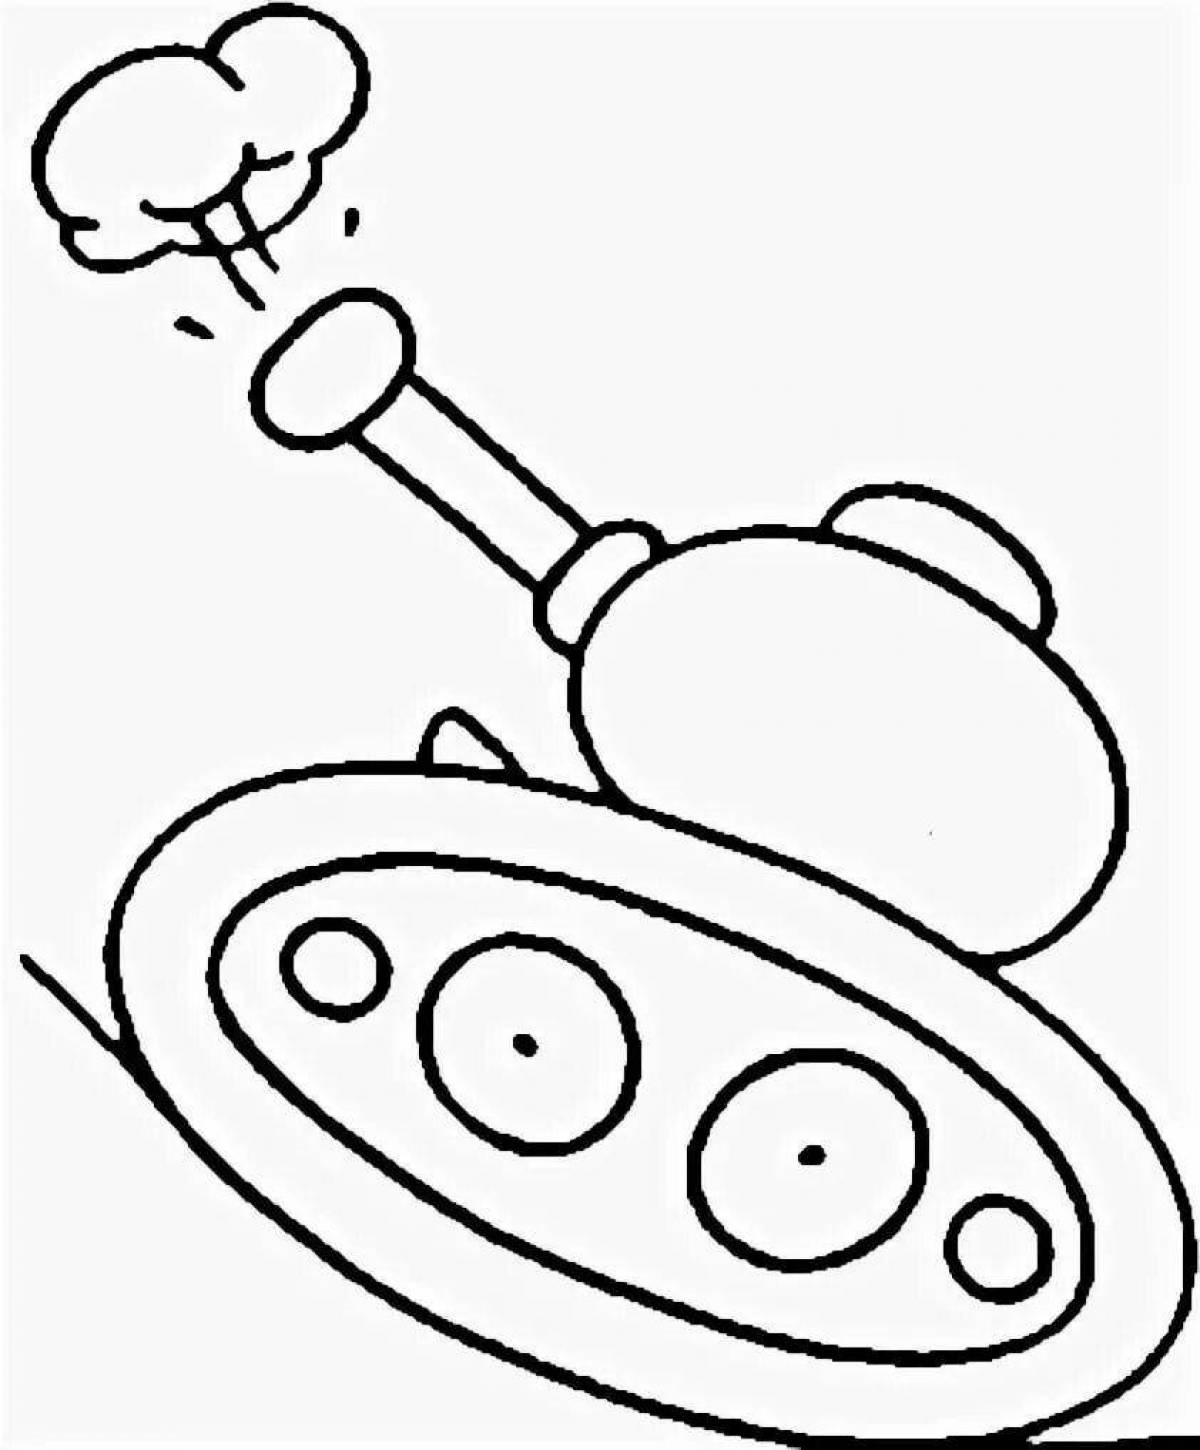 Lovely tank coloring book for babies